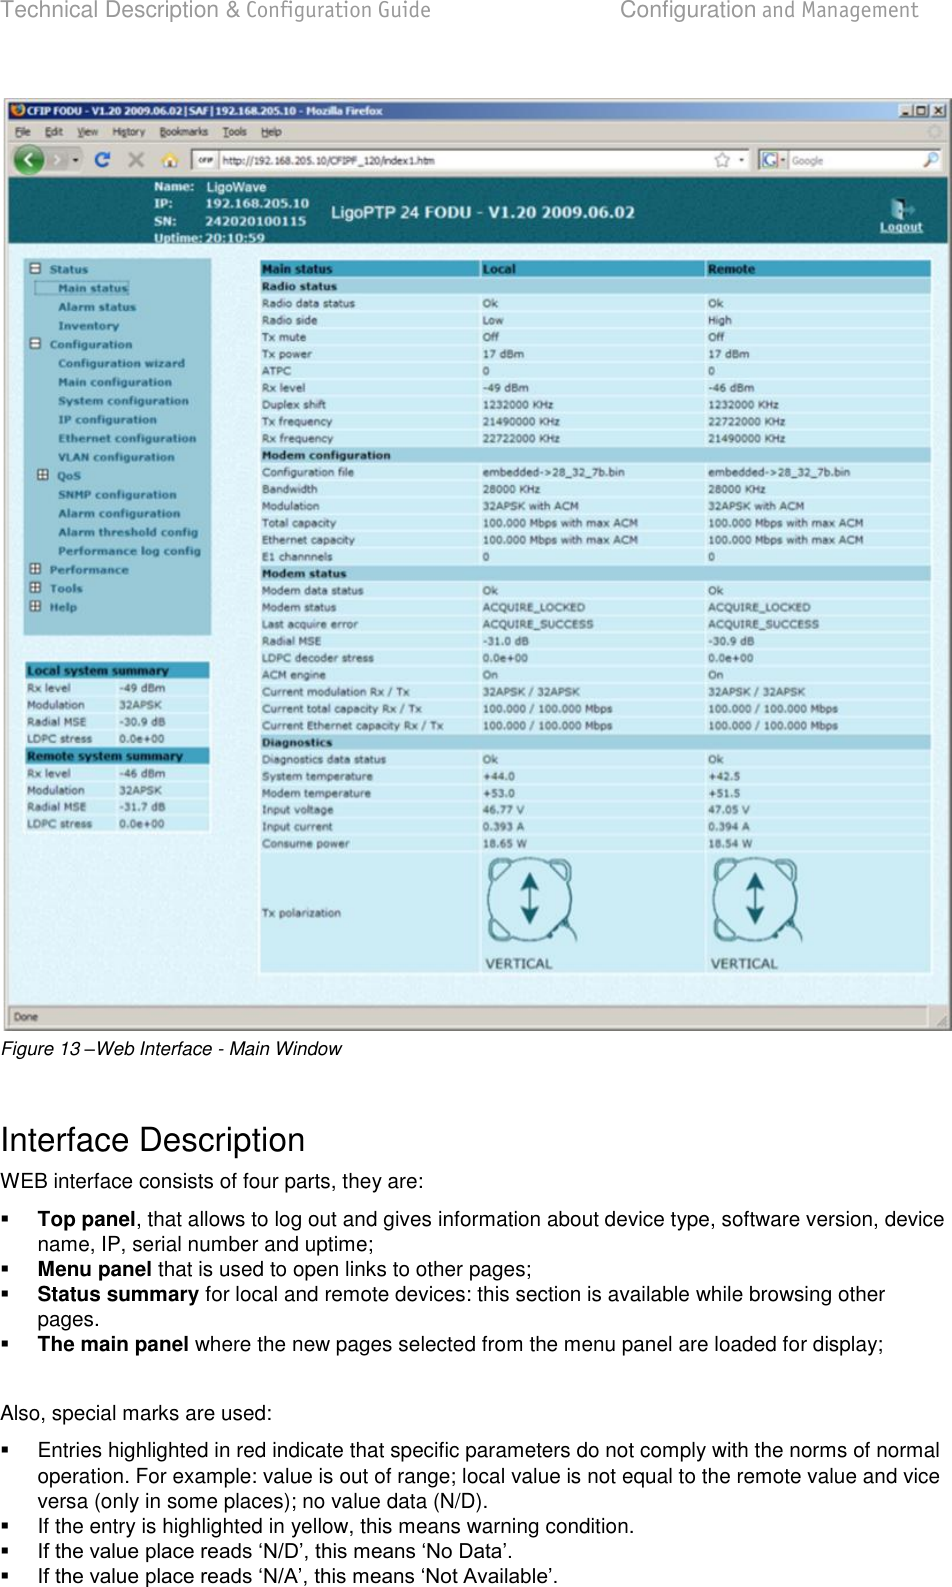 Technical Description &amp; Configuration Guide  Configuration and Management  LigoWave  Page 21  Figure 13 –Web Interface - Main Window  Interface Description WEB interface consists of four parts, they are:   Top panel, that allows to log out and gives information about device type, software version, device name, IP, serial number and uptime;  Menu panel that is used to open links to other pages;  Status summary for local and remote devices: this section is available while browsing other pages.  The main panel where the new pages selected from the menu panel are loaded for display;  Also, special marks are used:   Entries highlighted in red indicate that specific parameters do not comply with the norms of normal operation. For example: value is out of range; local value is not equal to the remote value and vice versa (only in some places); no value data (N/D).   If the entry is highlighted in yellow, this means warning condition.      